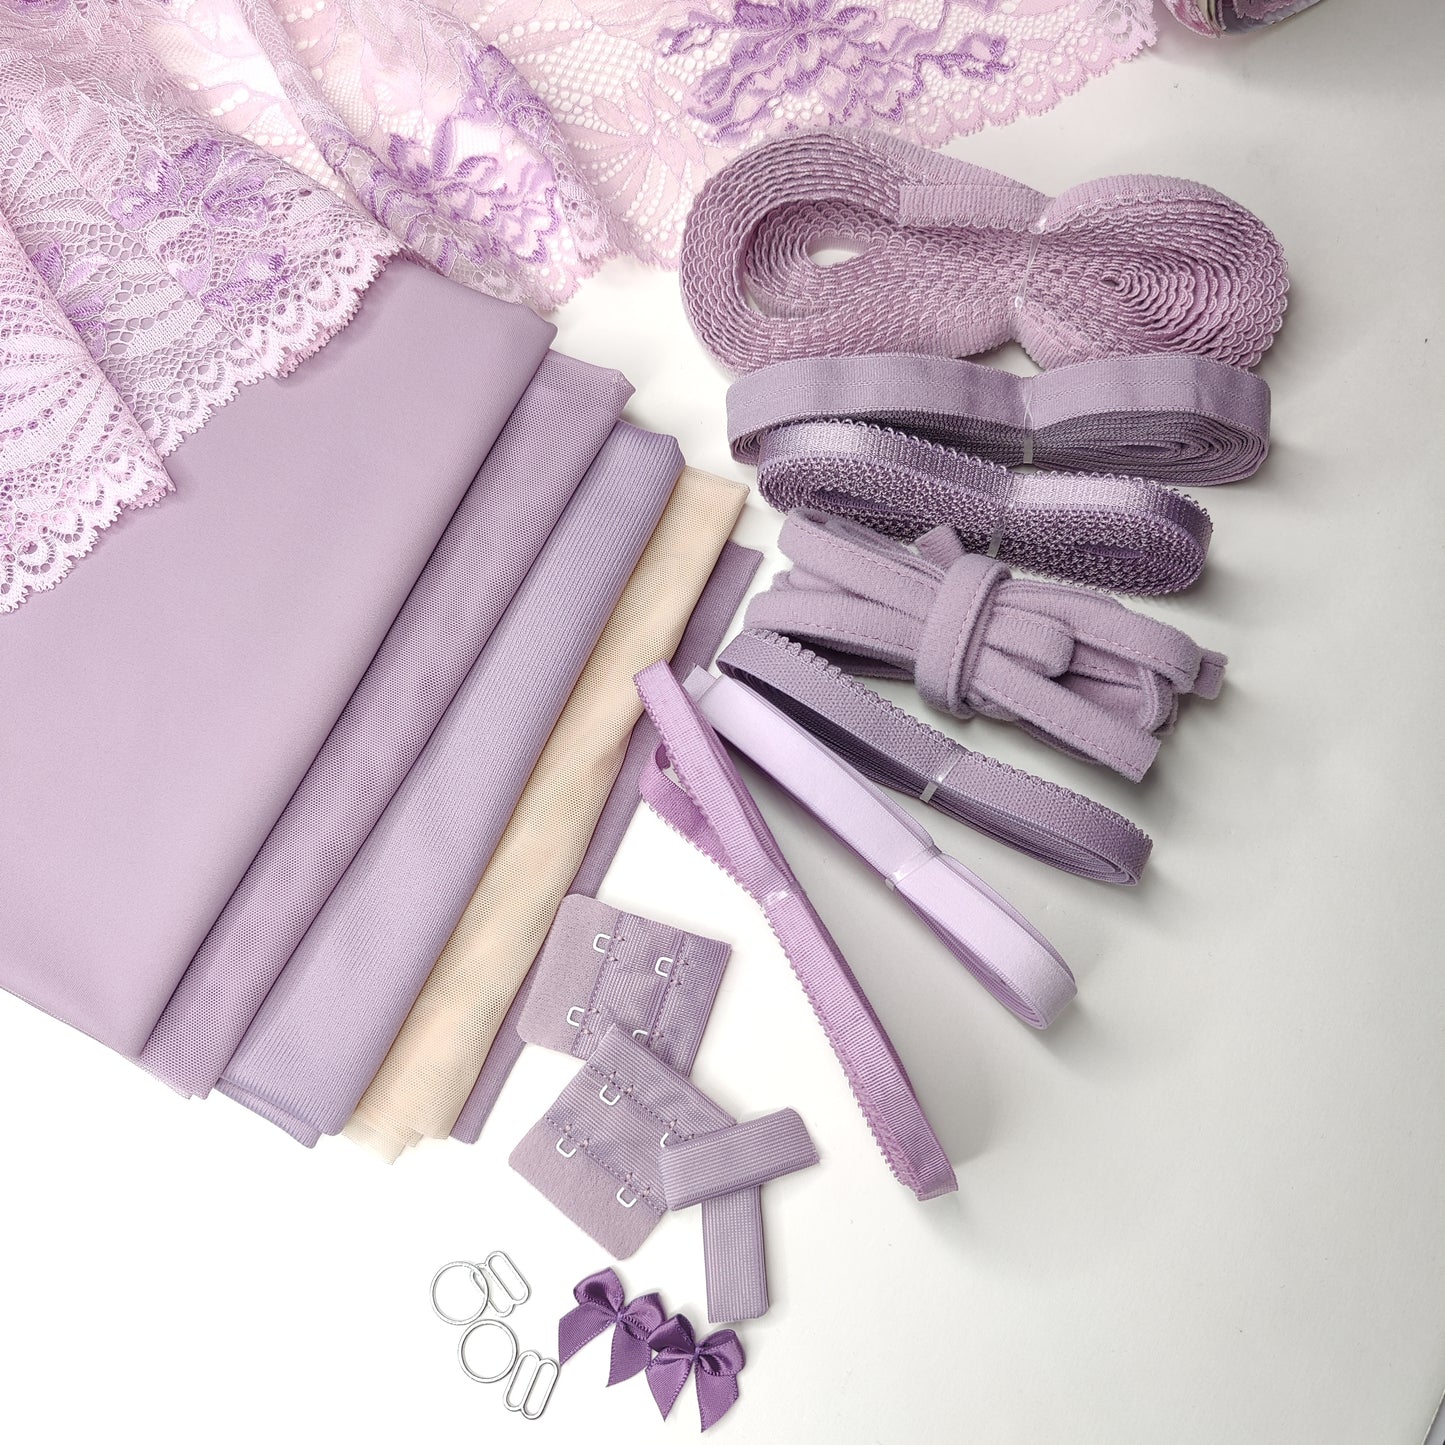 Large sewing set for 2x bras and panties or sewing package with <tc>lace</tc>, microfiber and Powernet in sea fog IDnsx1